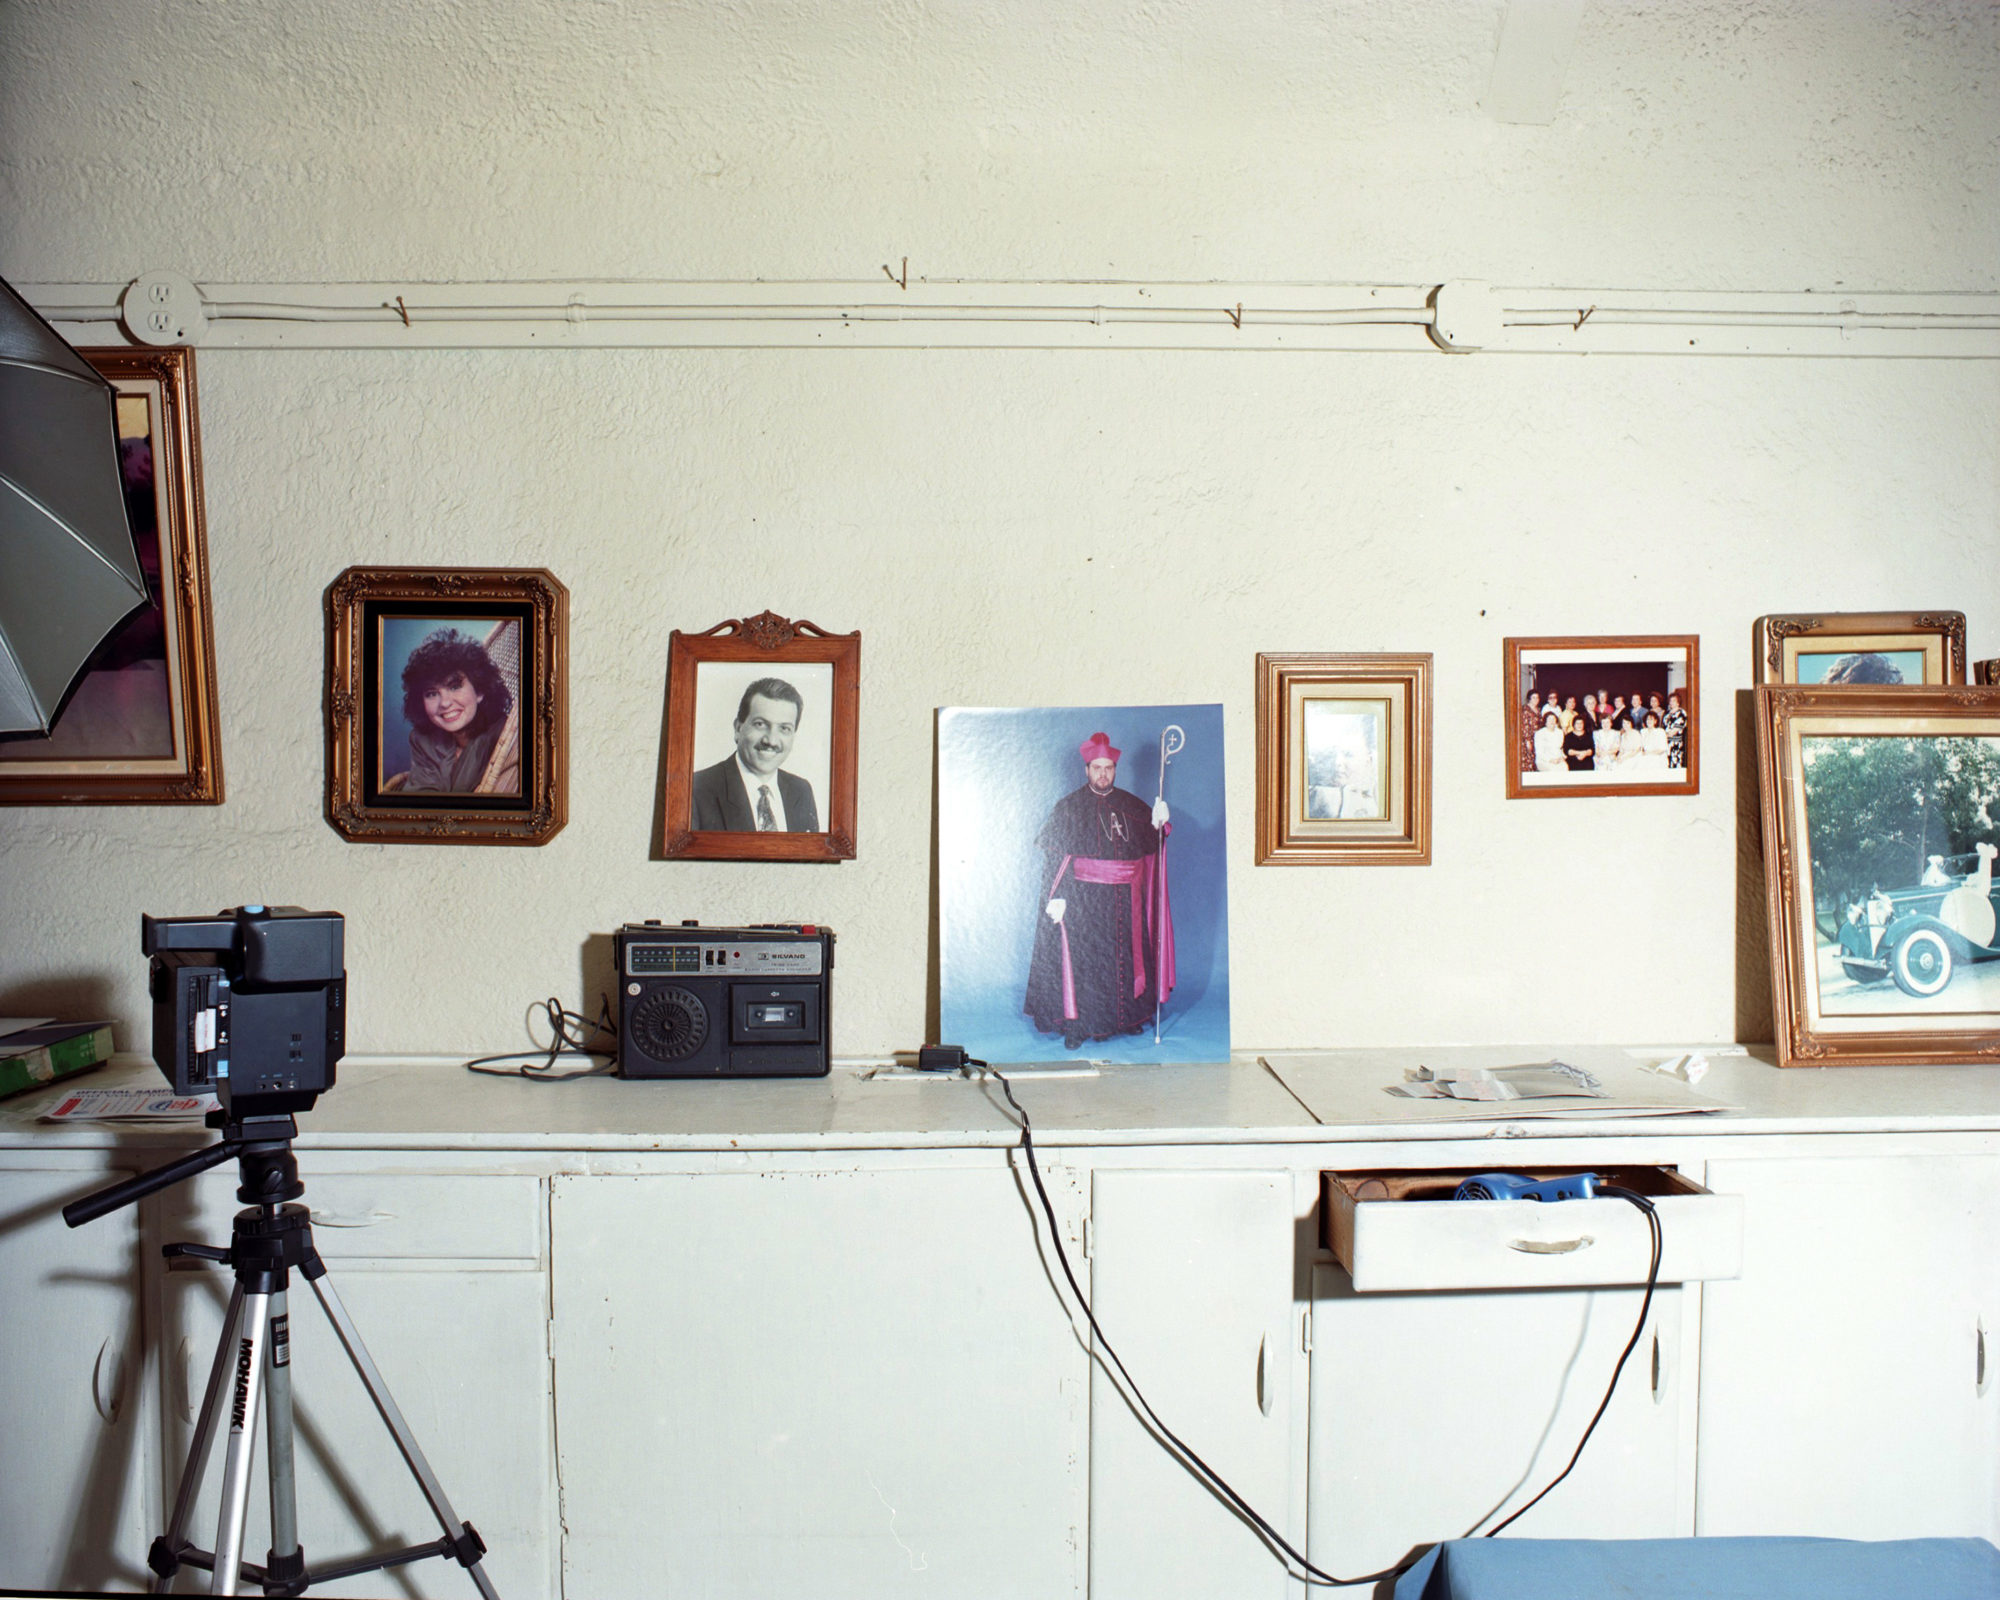 A series of portraits hang against white wall with camera equipment in the foreground